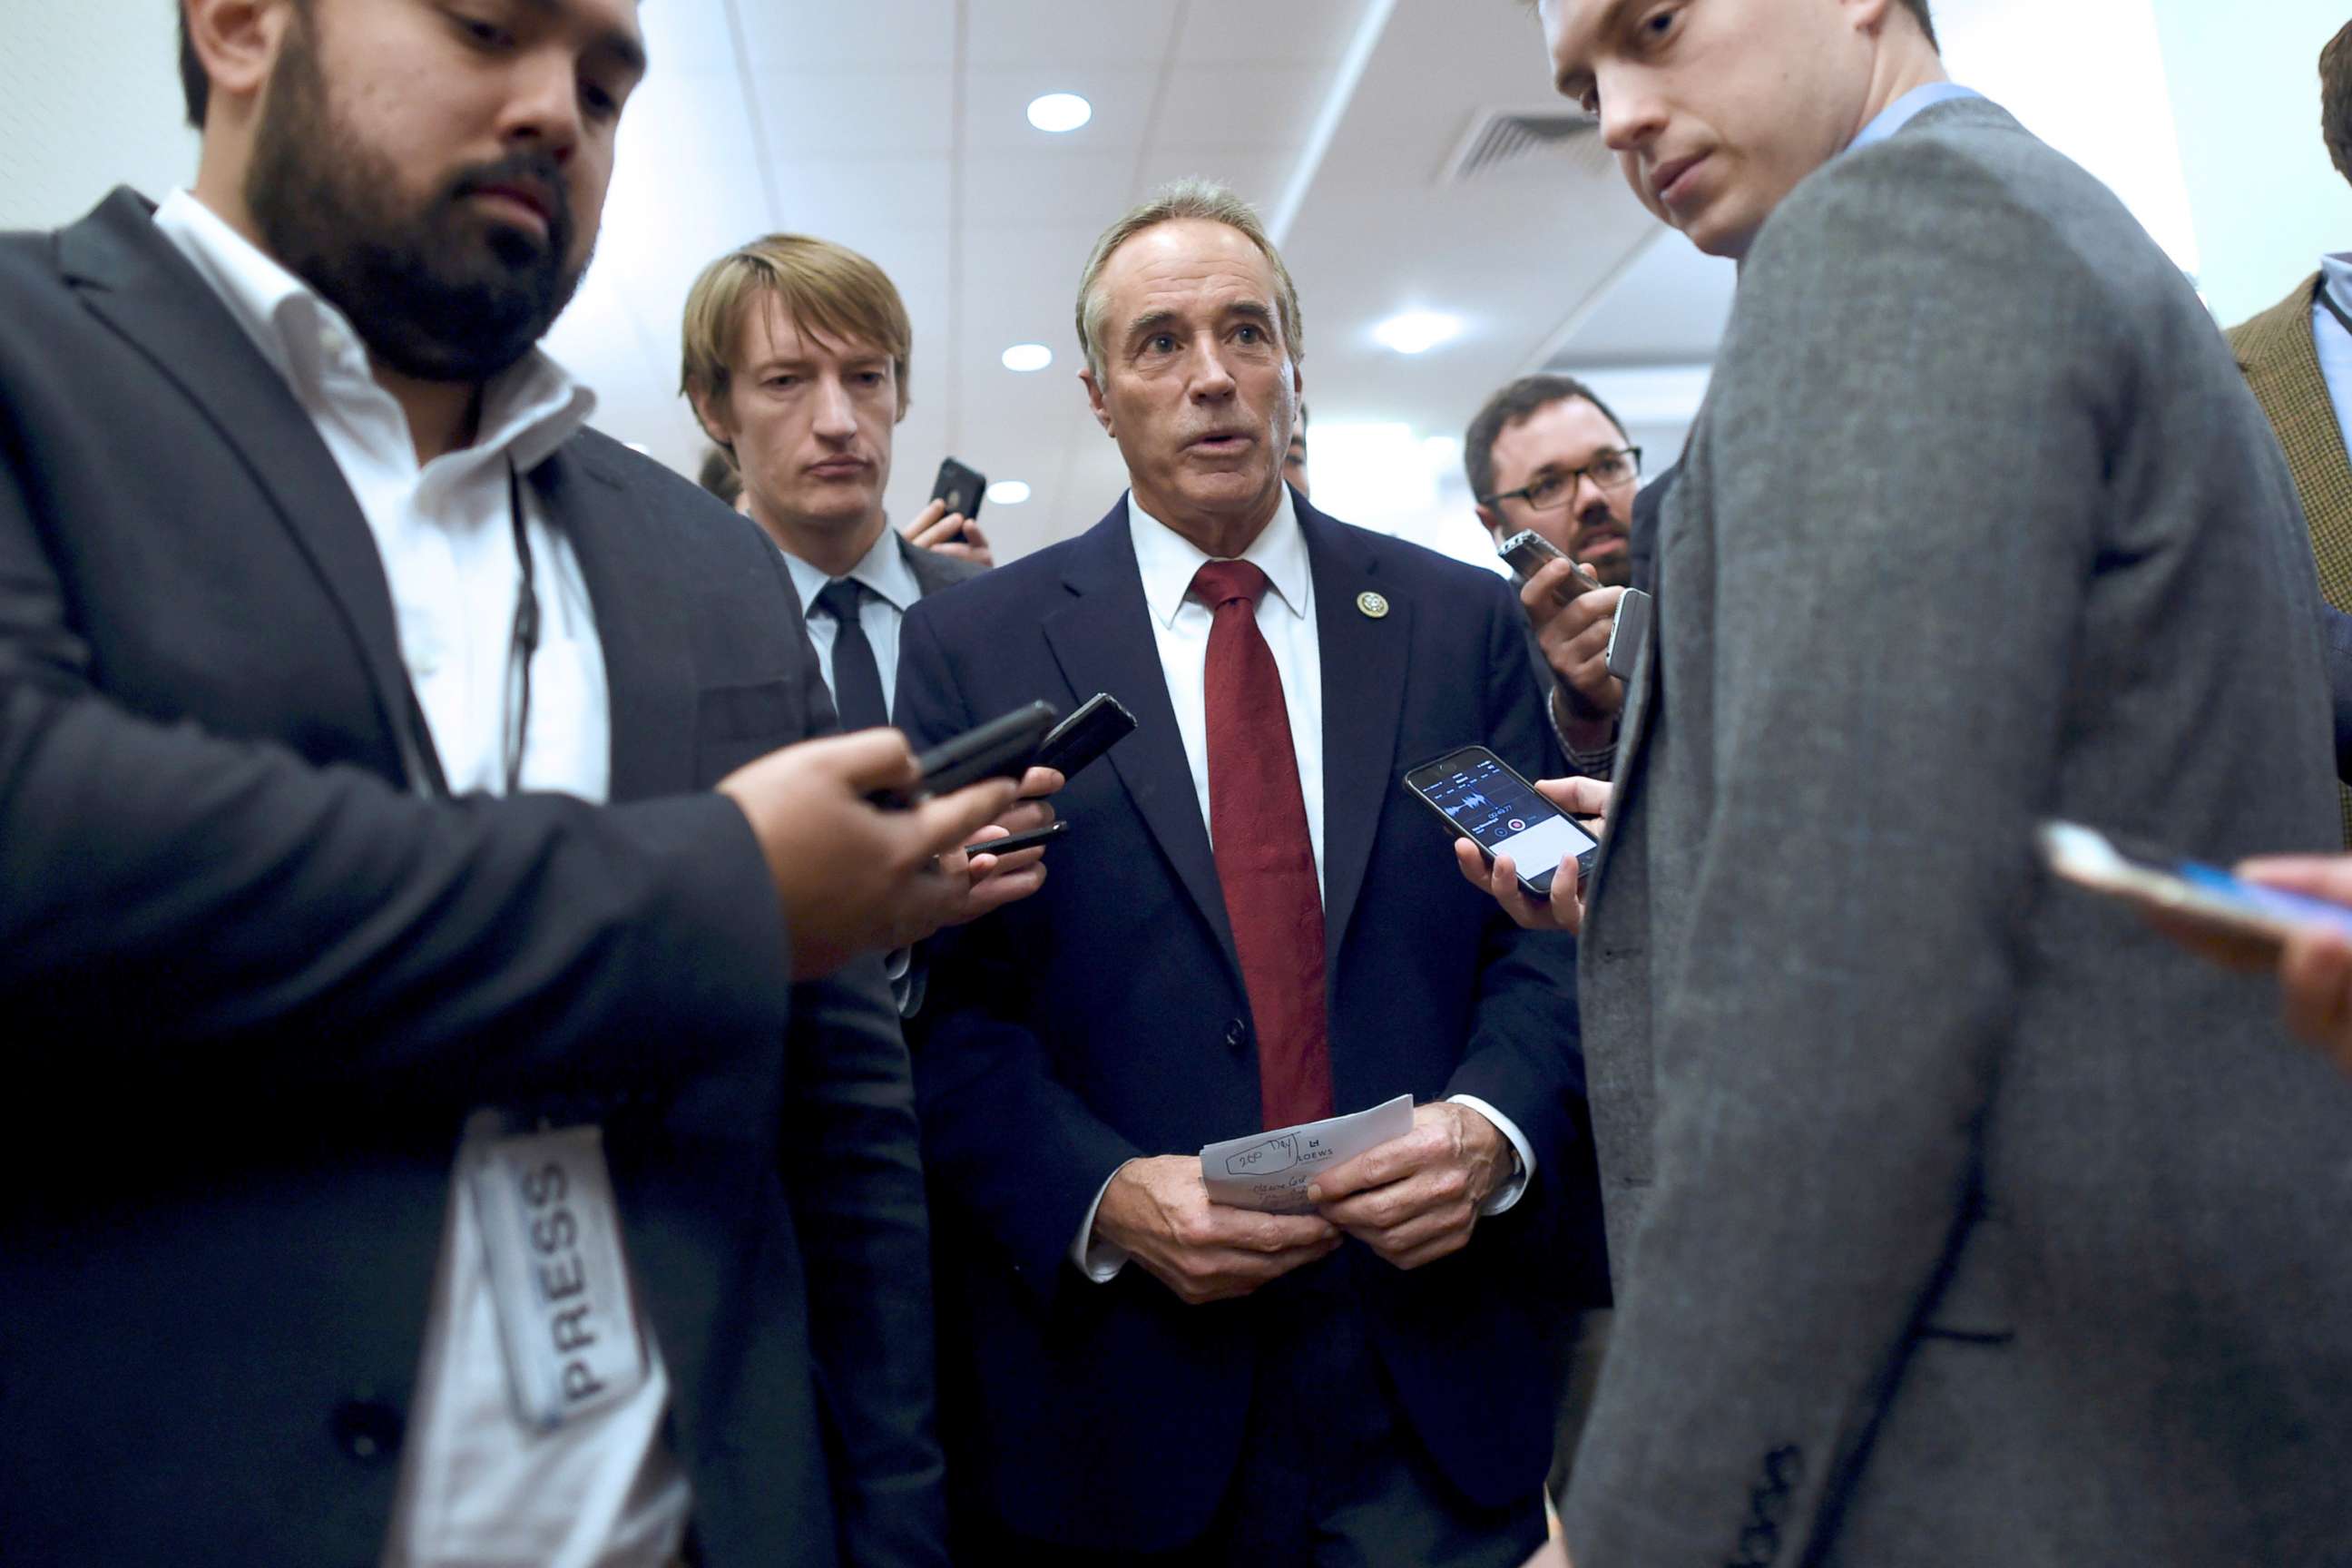 PHOTO: Representative Chris Collins is interviewed during the 2017 "Congress of Tomorrow" Joint Republican Issues Conference in Philadelphia, Jan. 25, 2017.